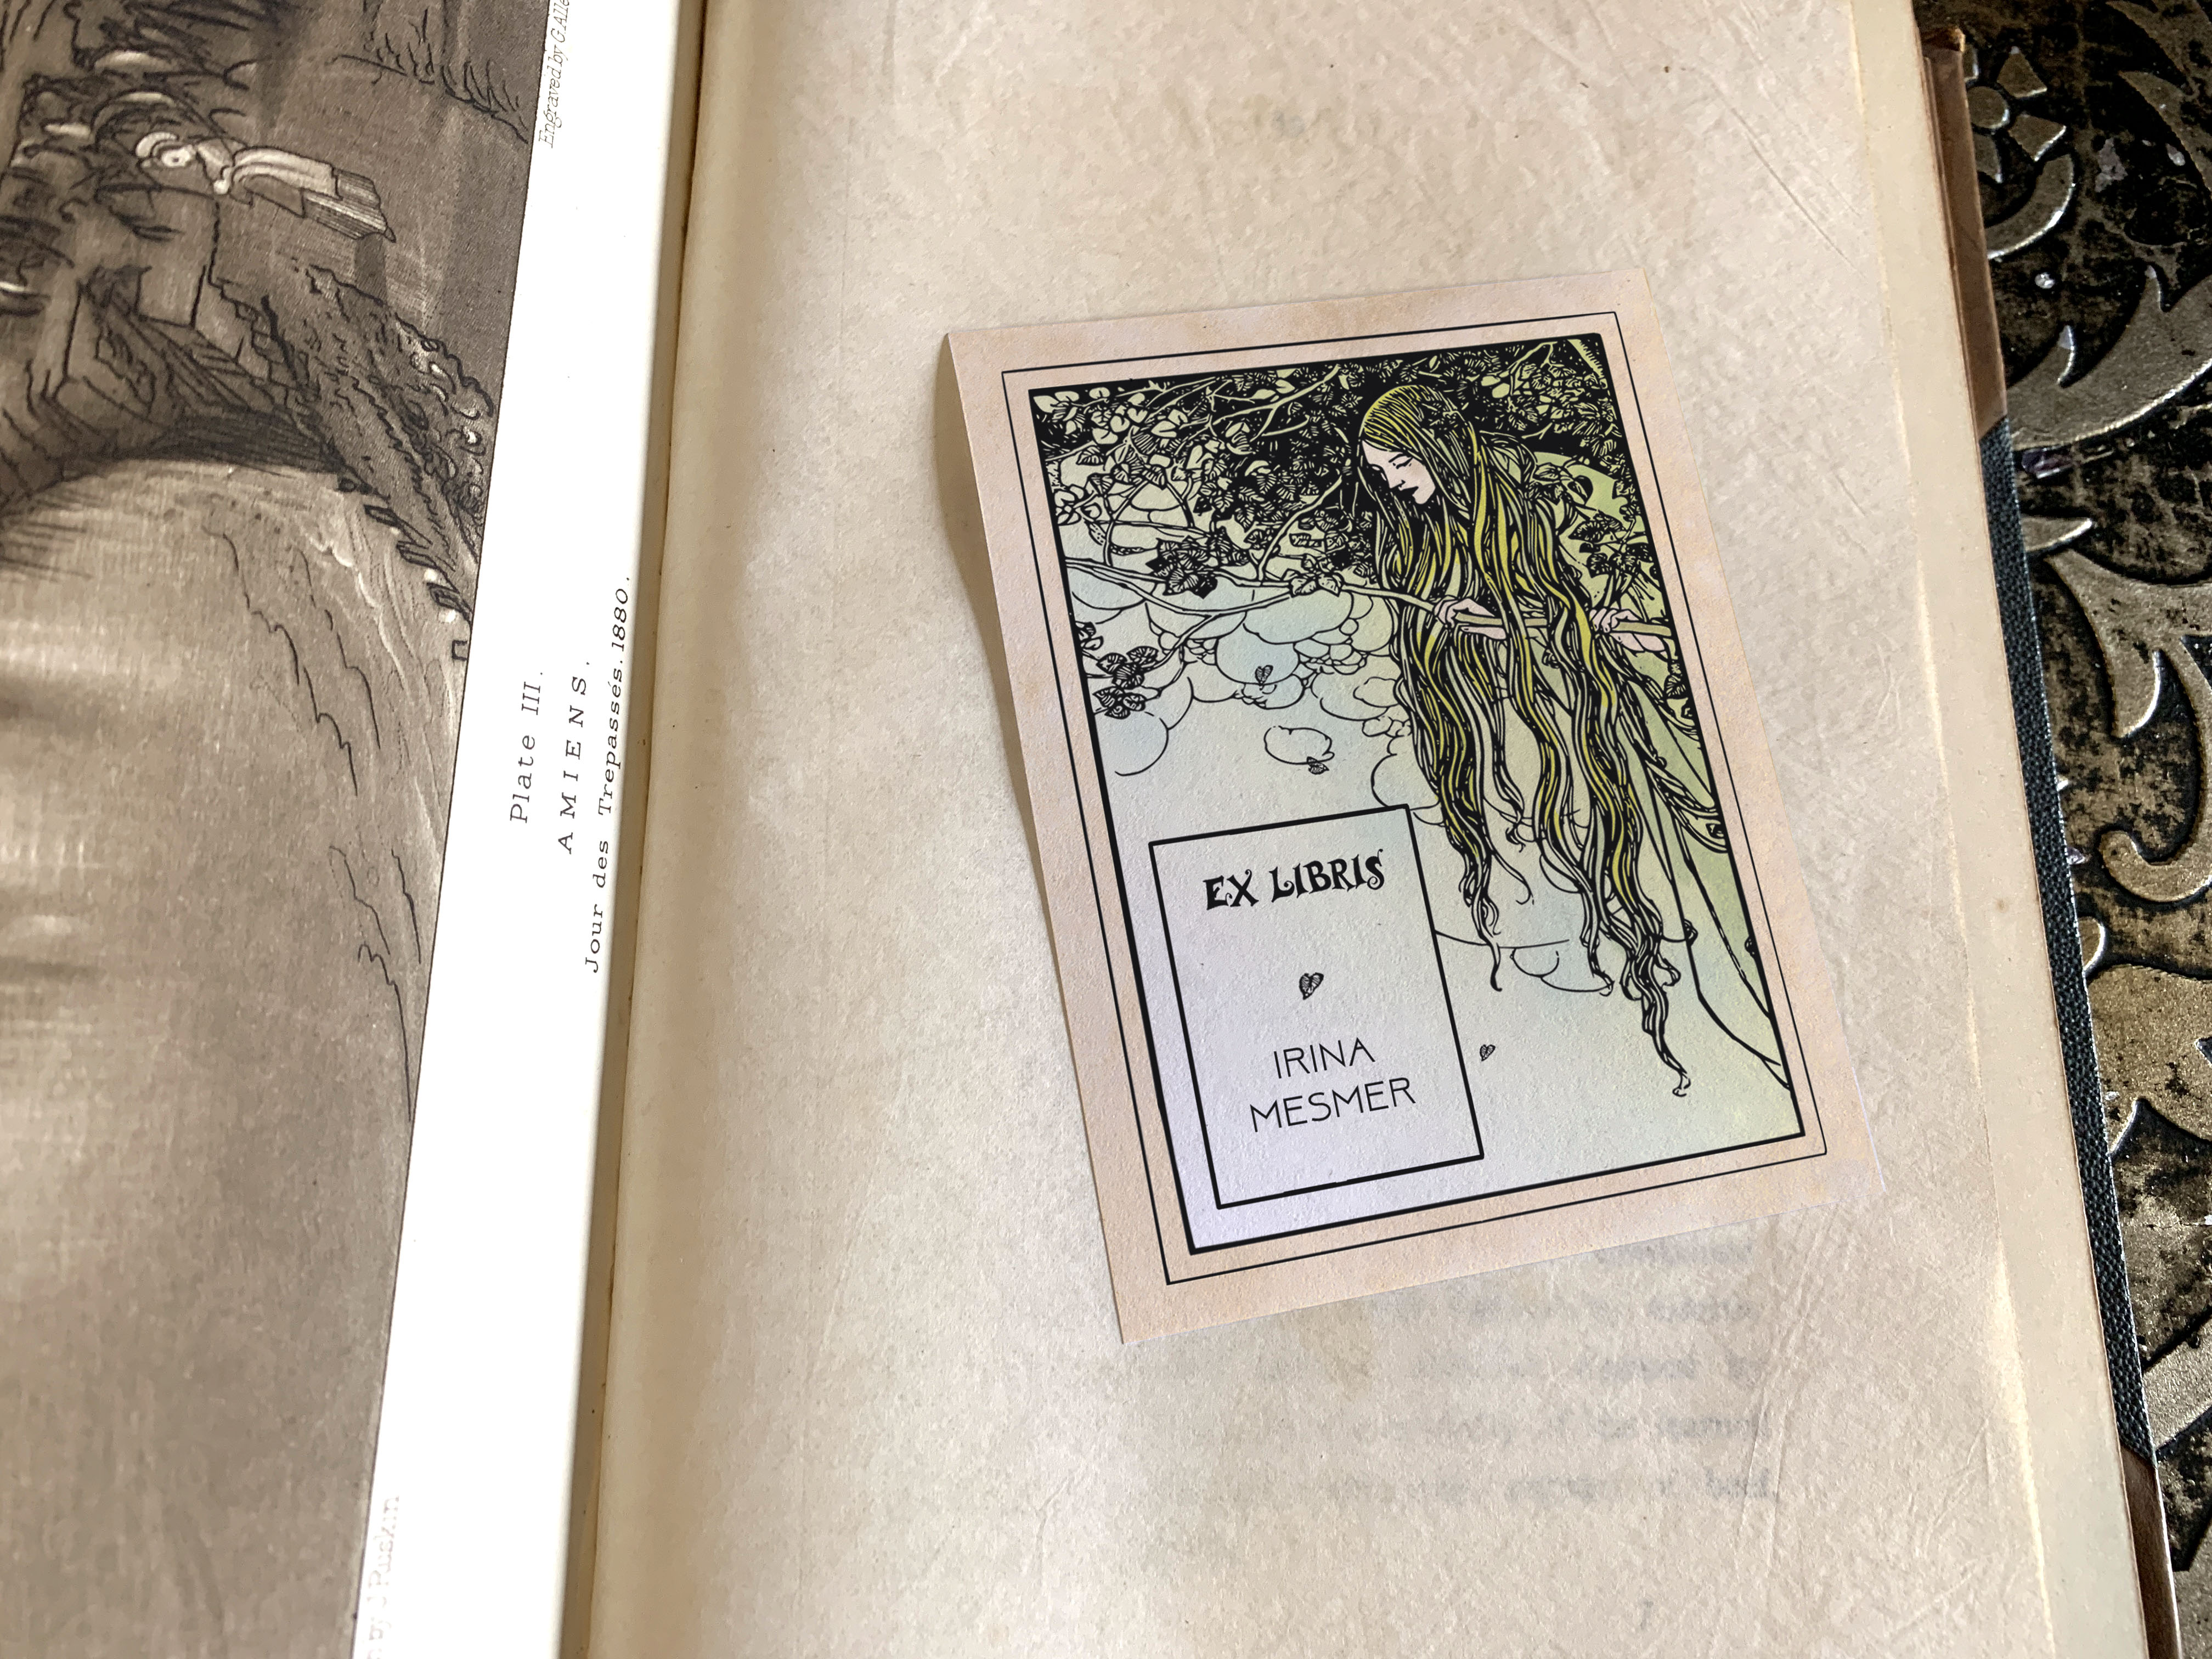 Curious Dryad, Personalized Ex-Libris Bookplates, Crafted on Traditional Gummed Paper, 3in x 4in, Set of 30